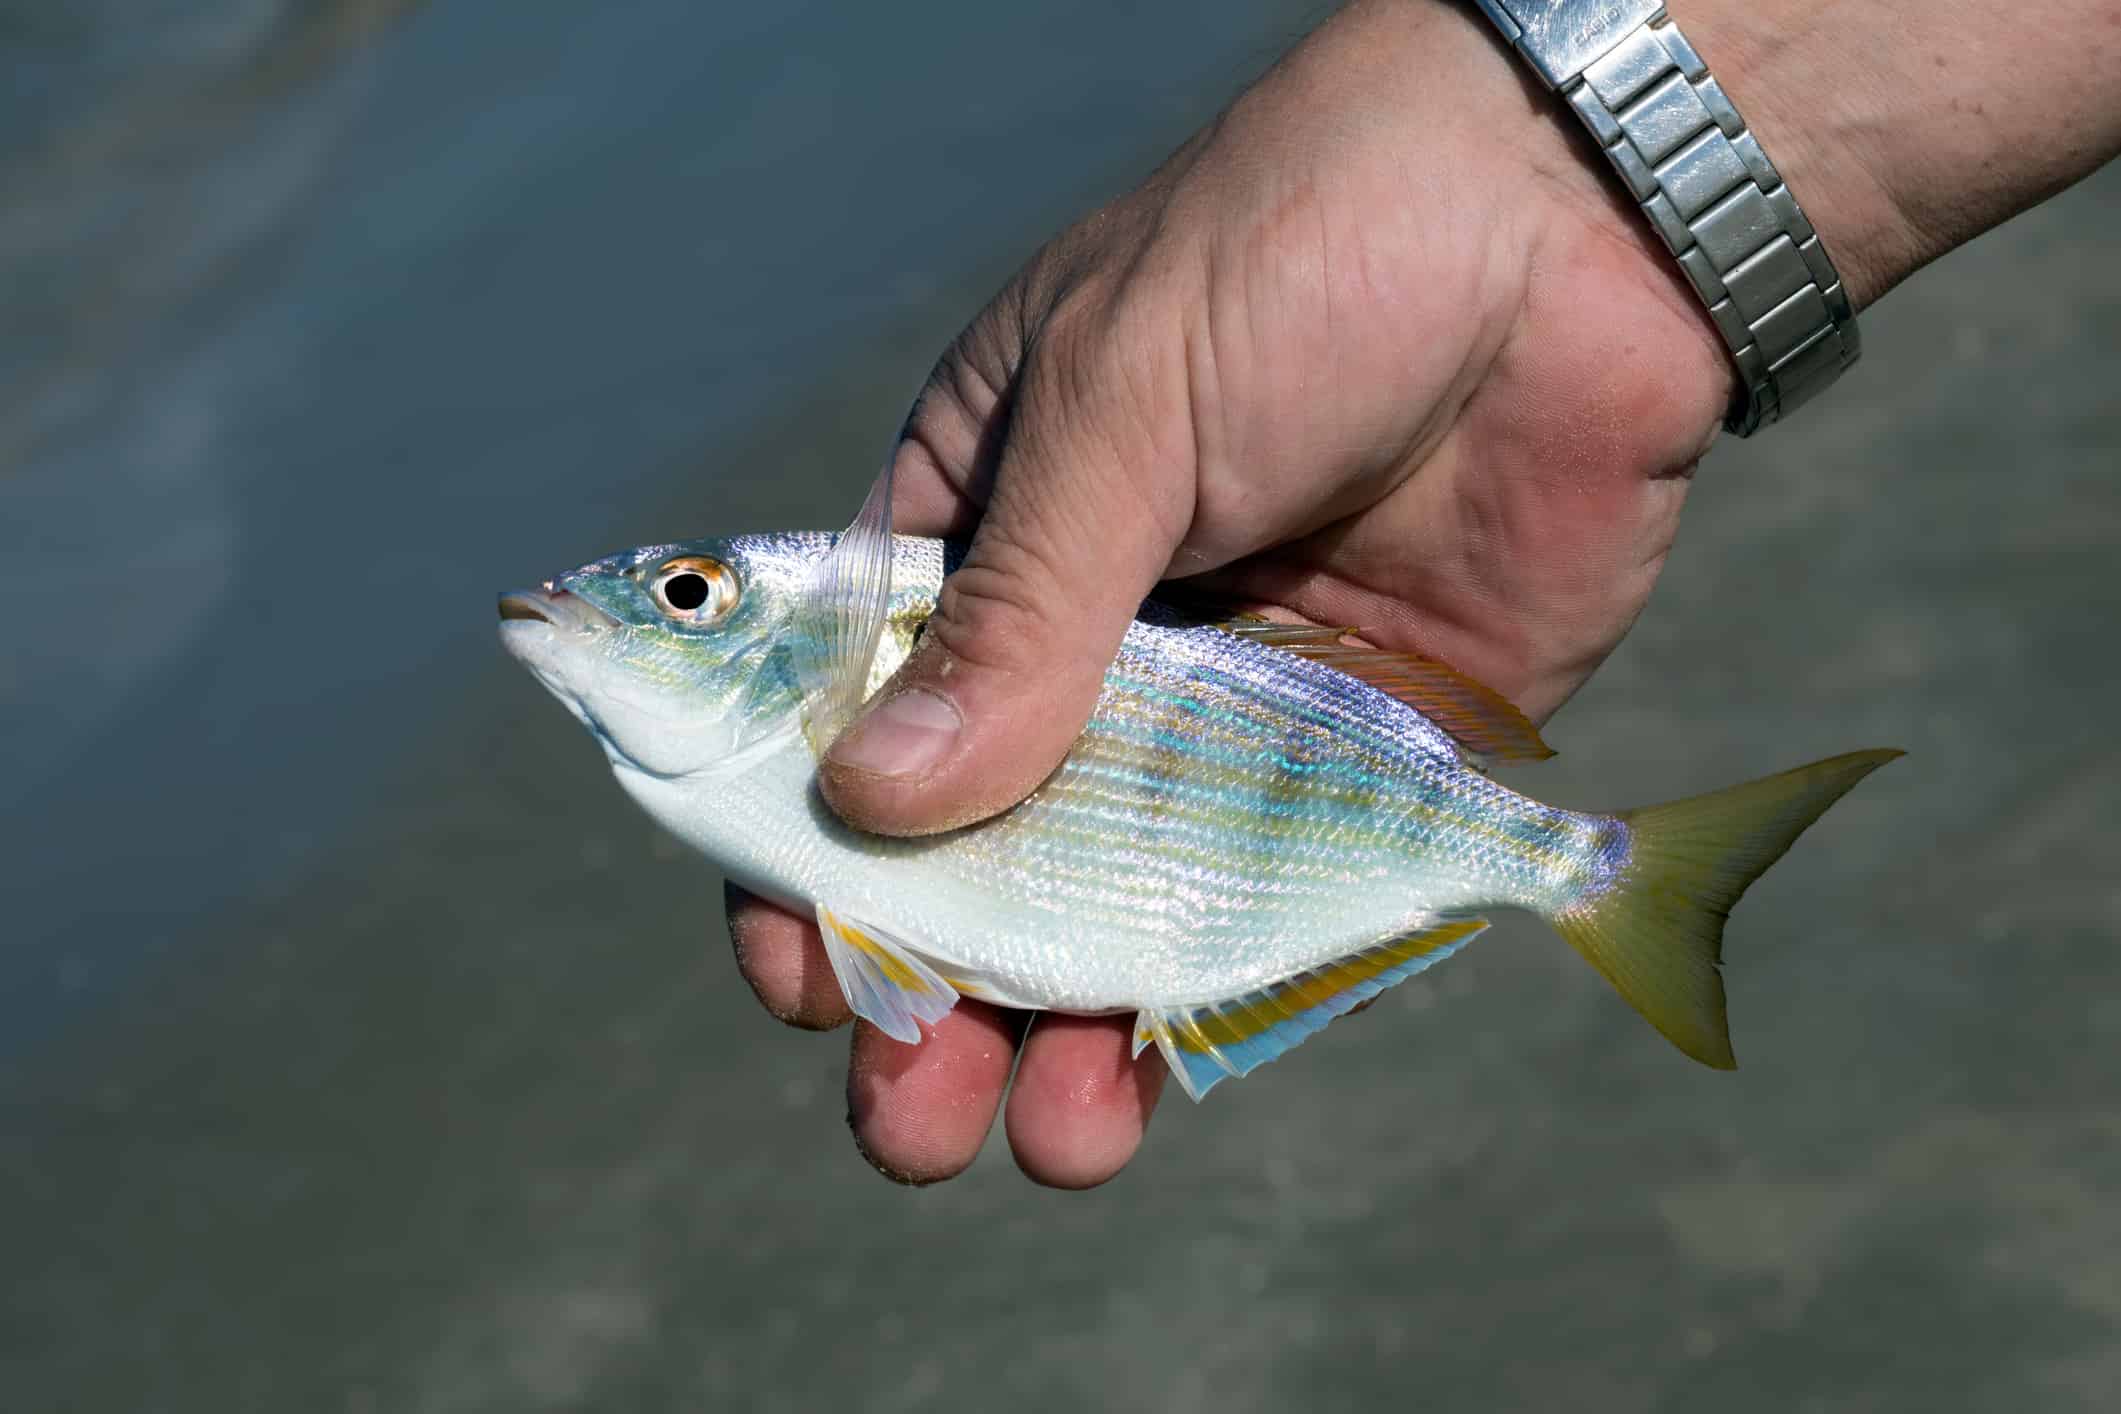 The pinfish has a a mix of yellow, green, and blue coloring